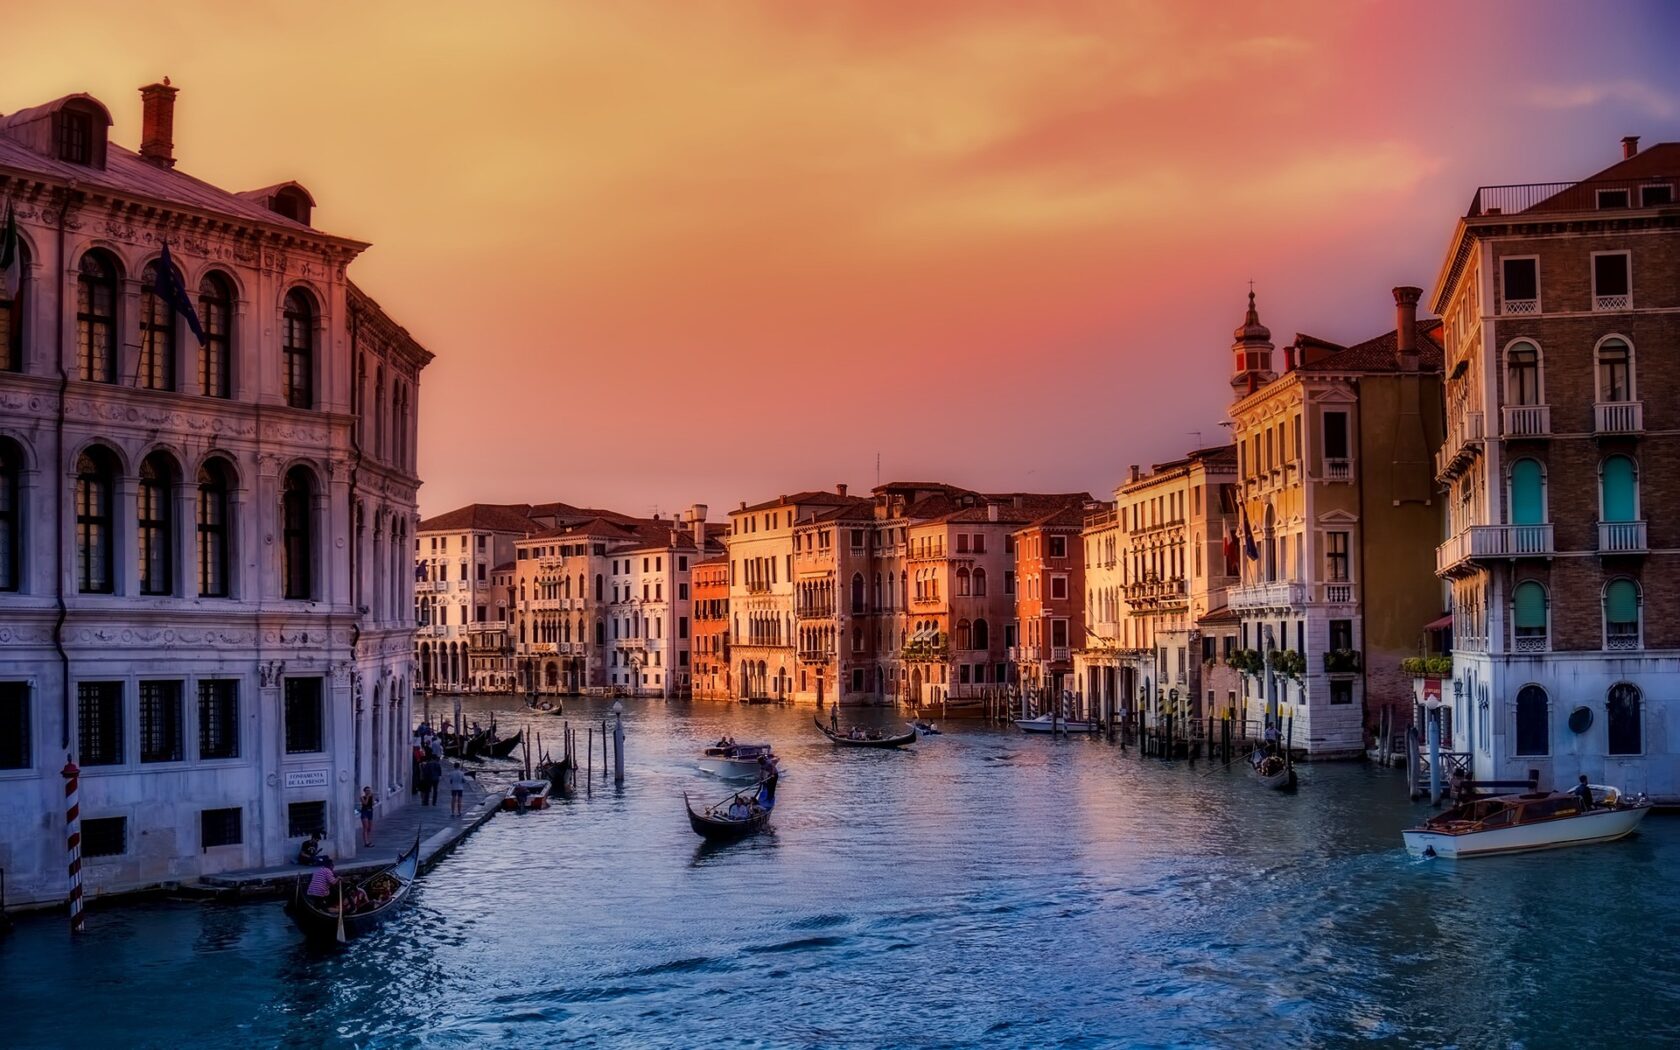 Canals with gondolas at sunset in Venice (an Atlantis site).